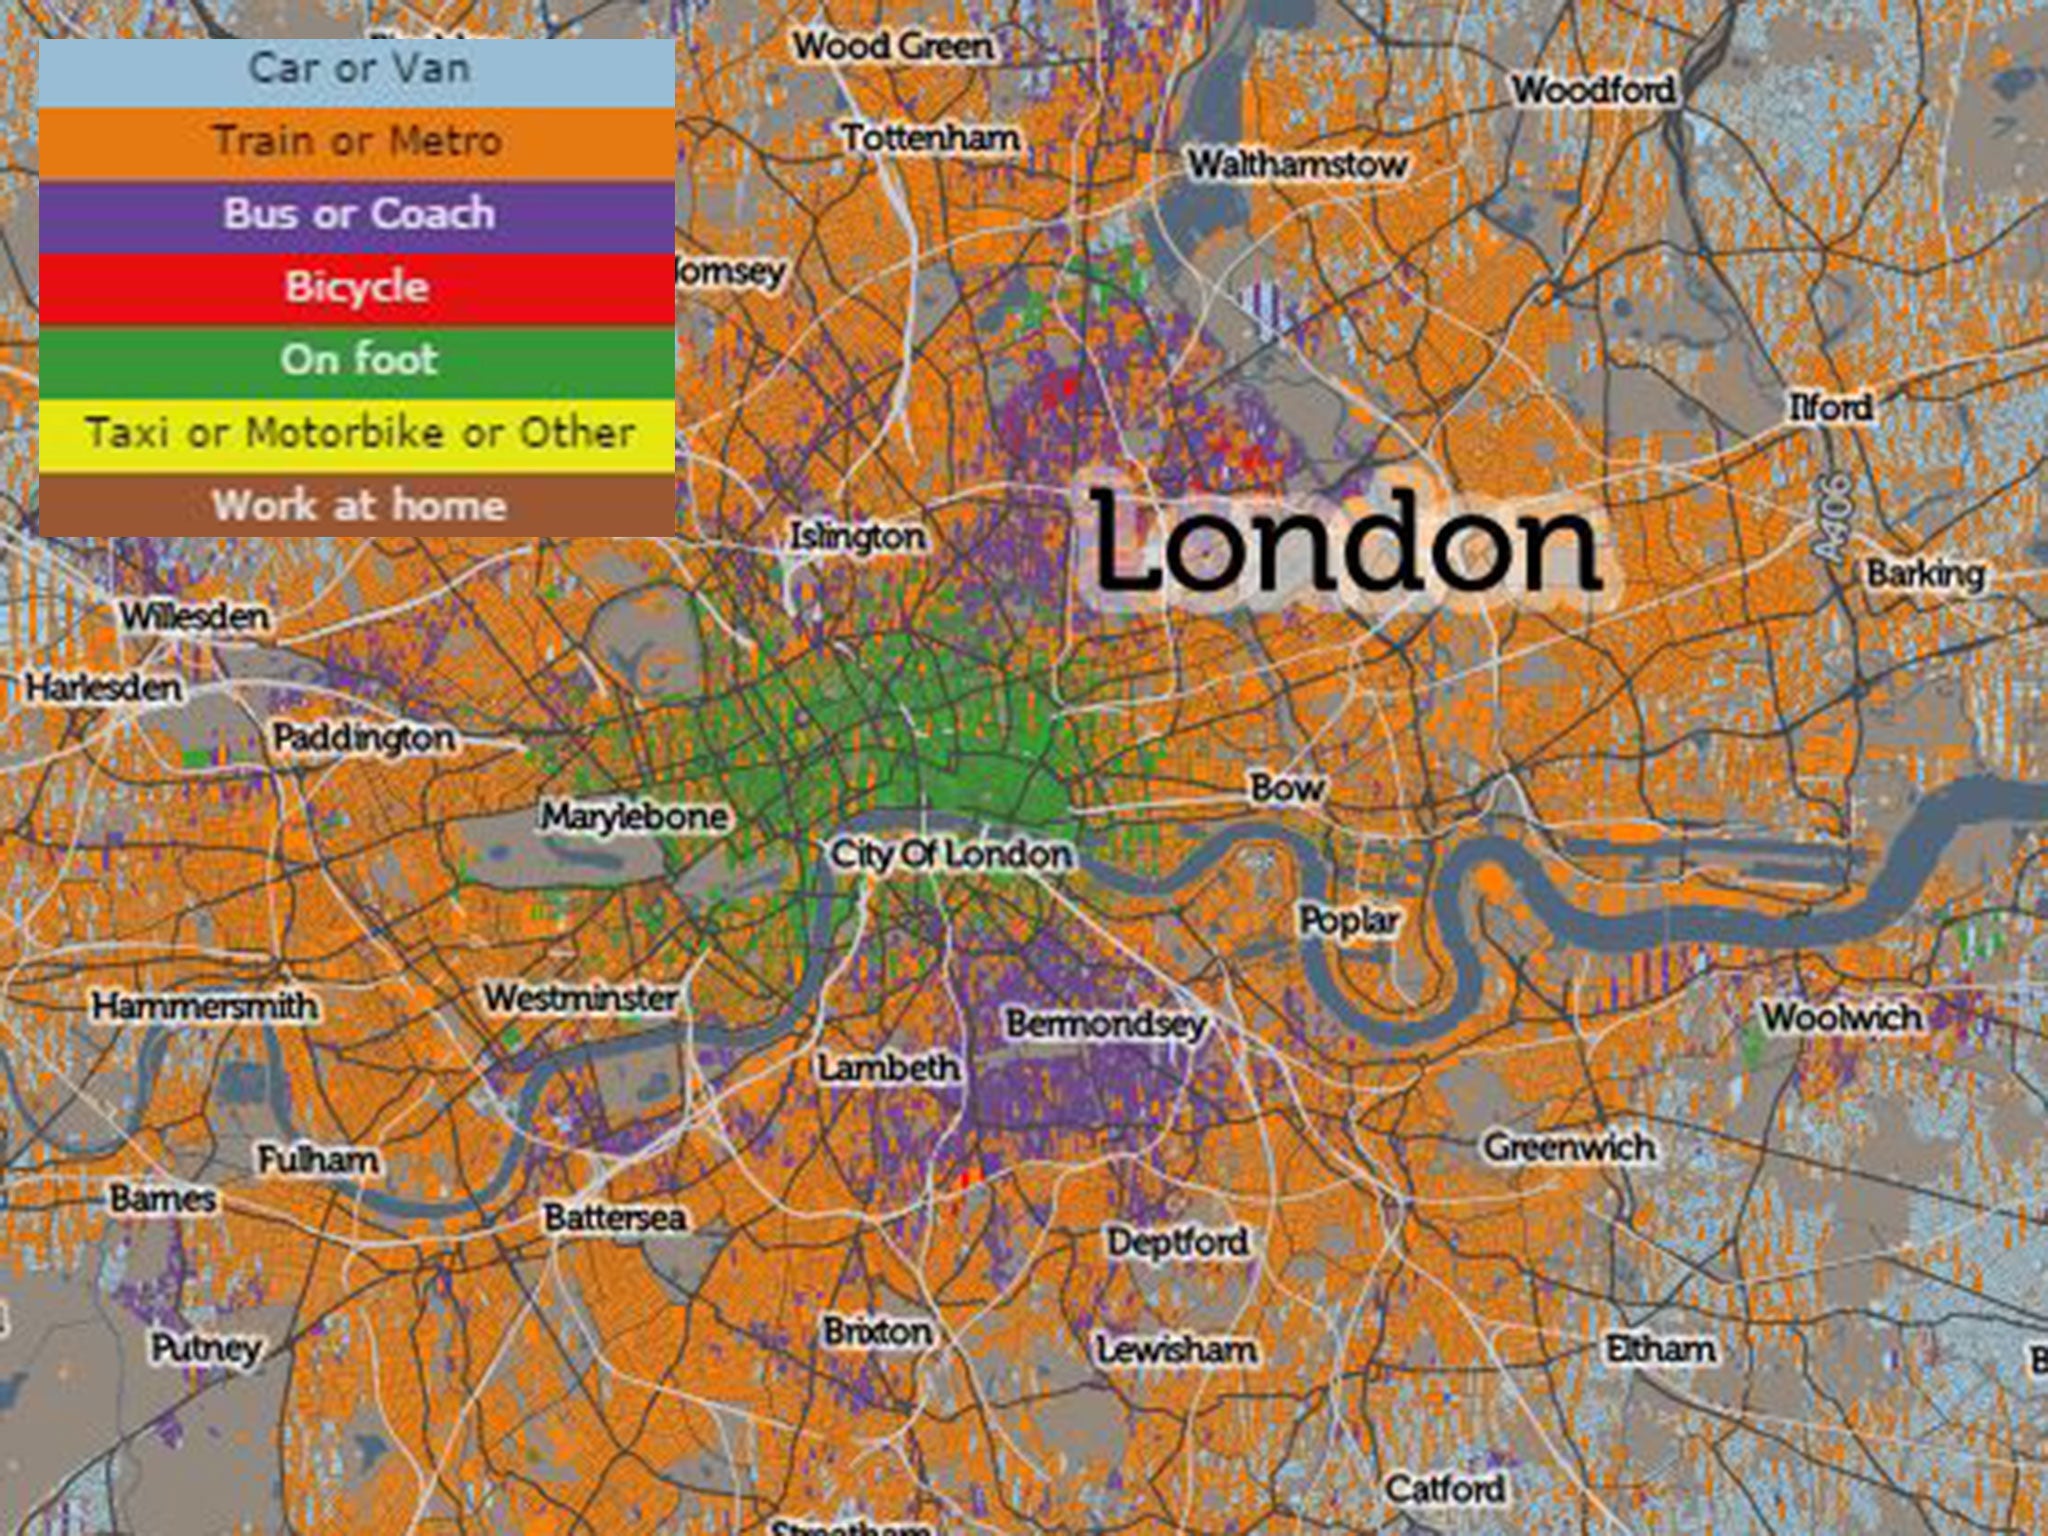 The map shows how residents from different areas of London travel to work